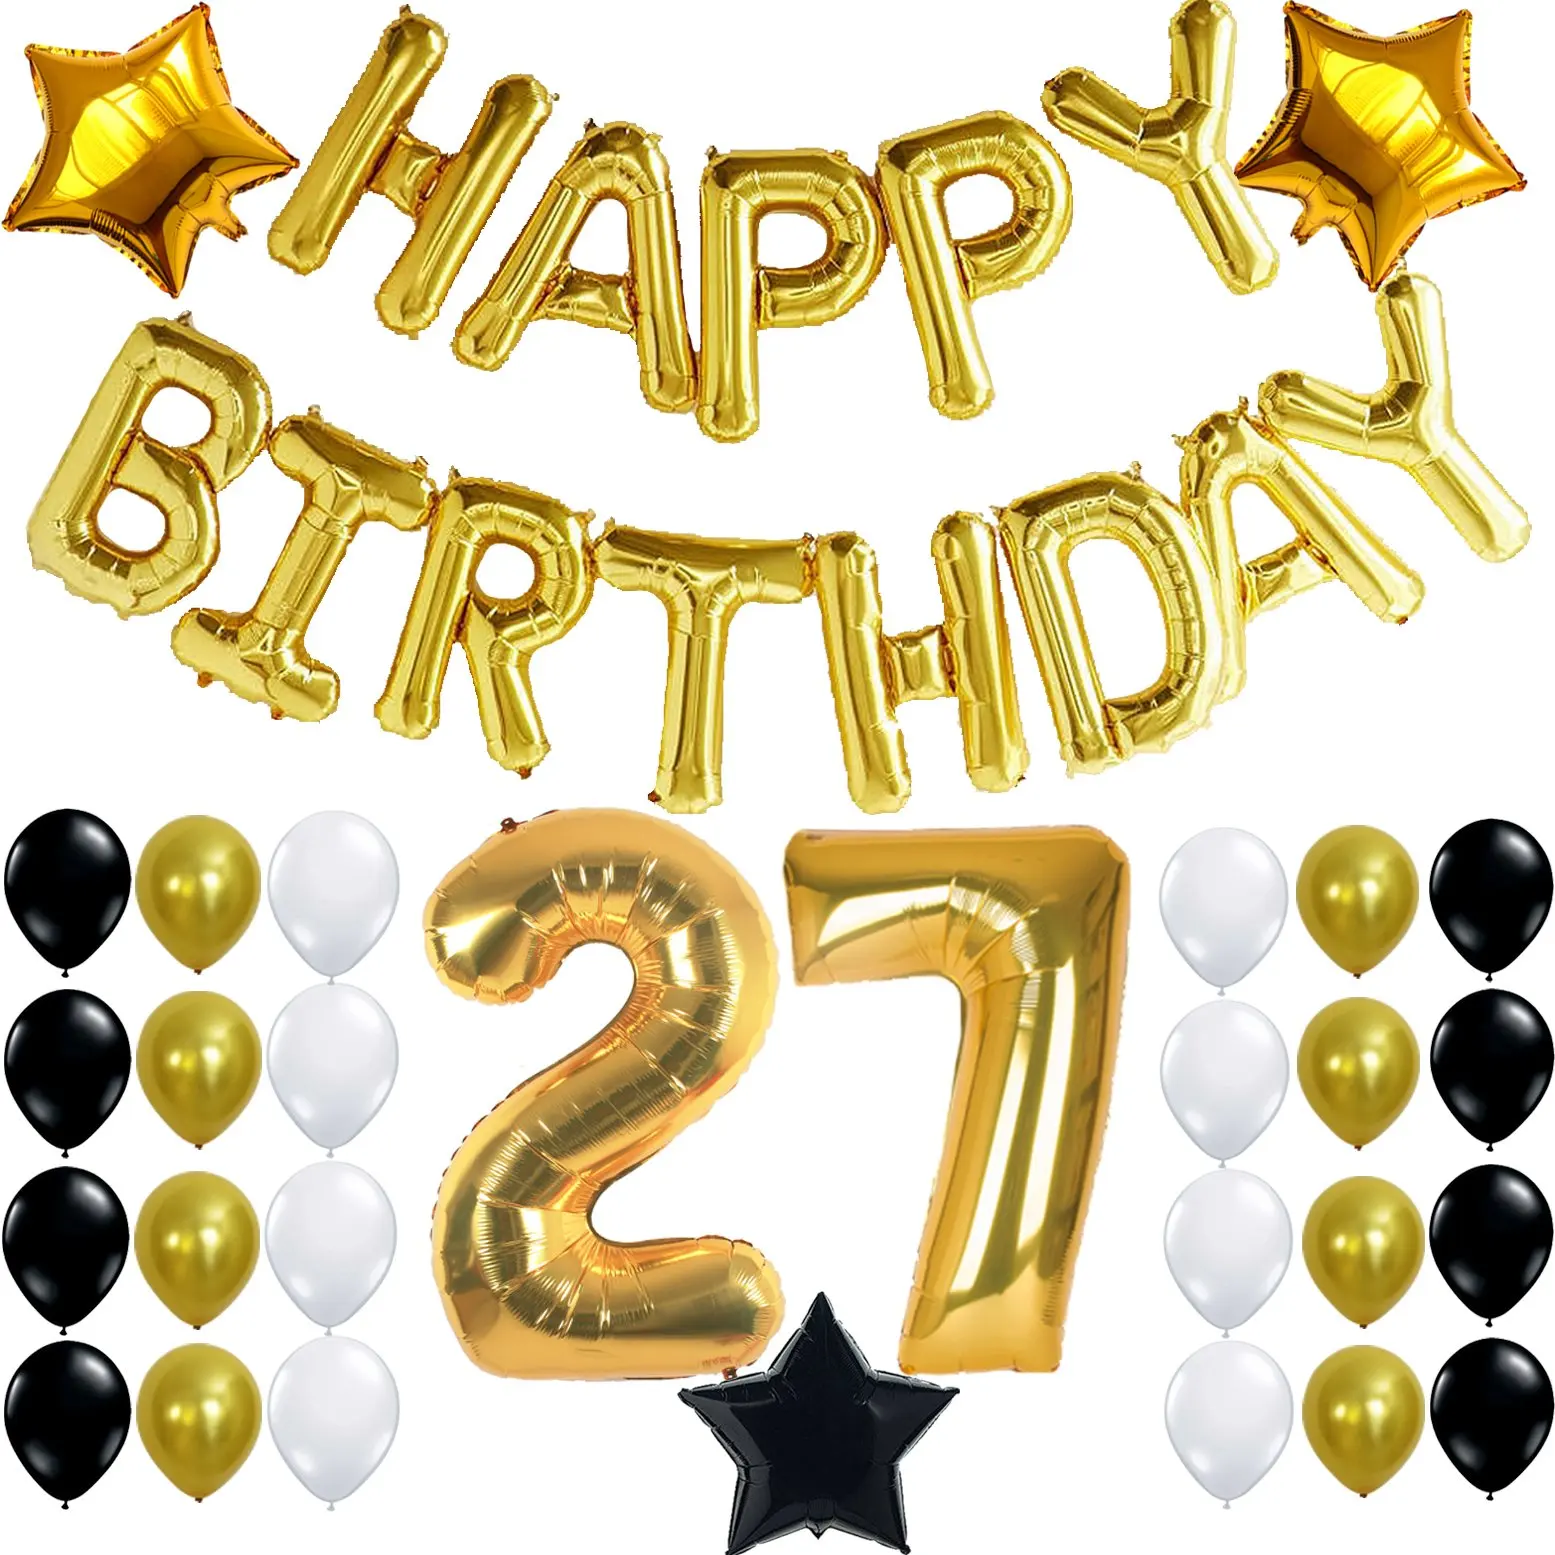 Buy 27th Birthday Party Decorations Kit 